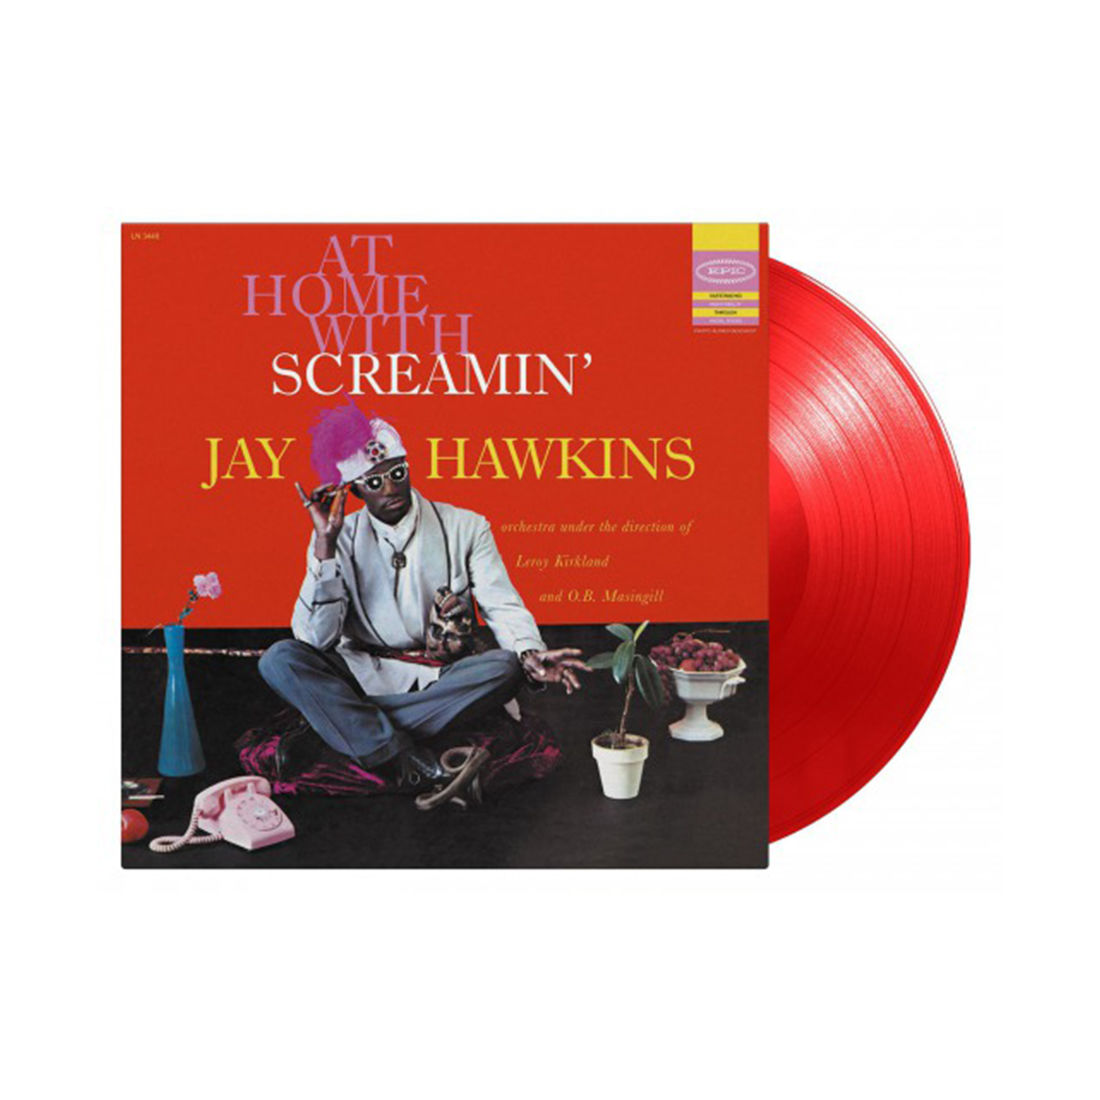 At Home With Screamin' Jay Hawkins: Limited Edition Red Vinyl LP